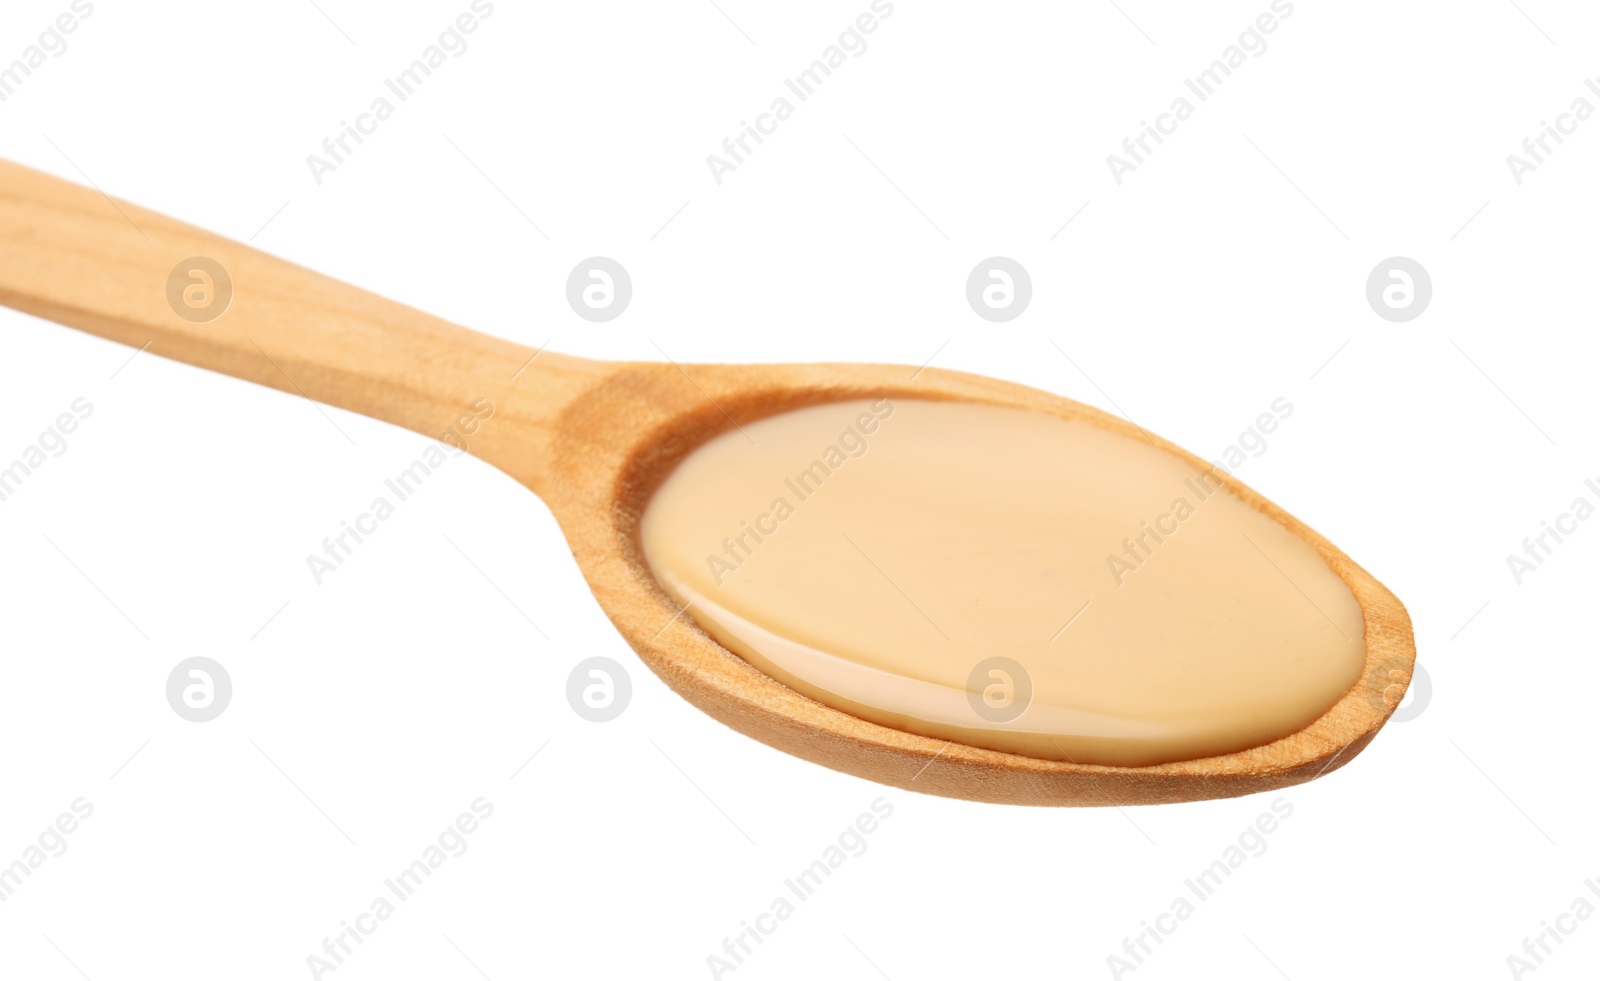 Photo of Wooden spoon with tasty peanut butter isolated on white